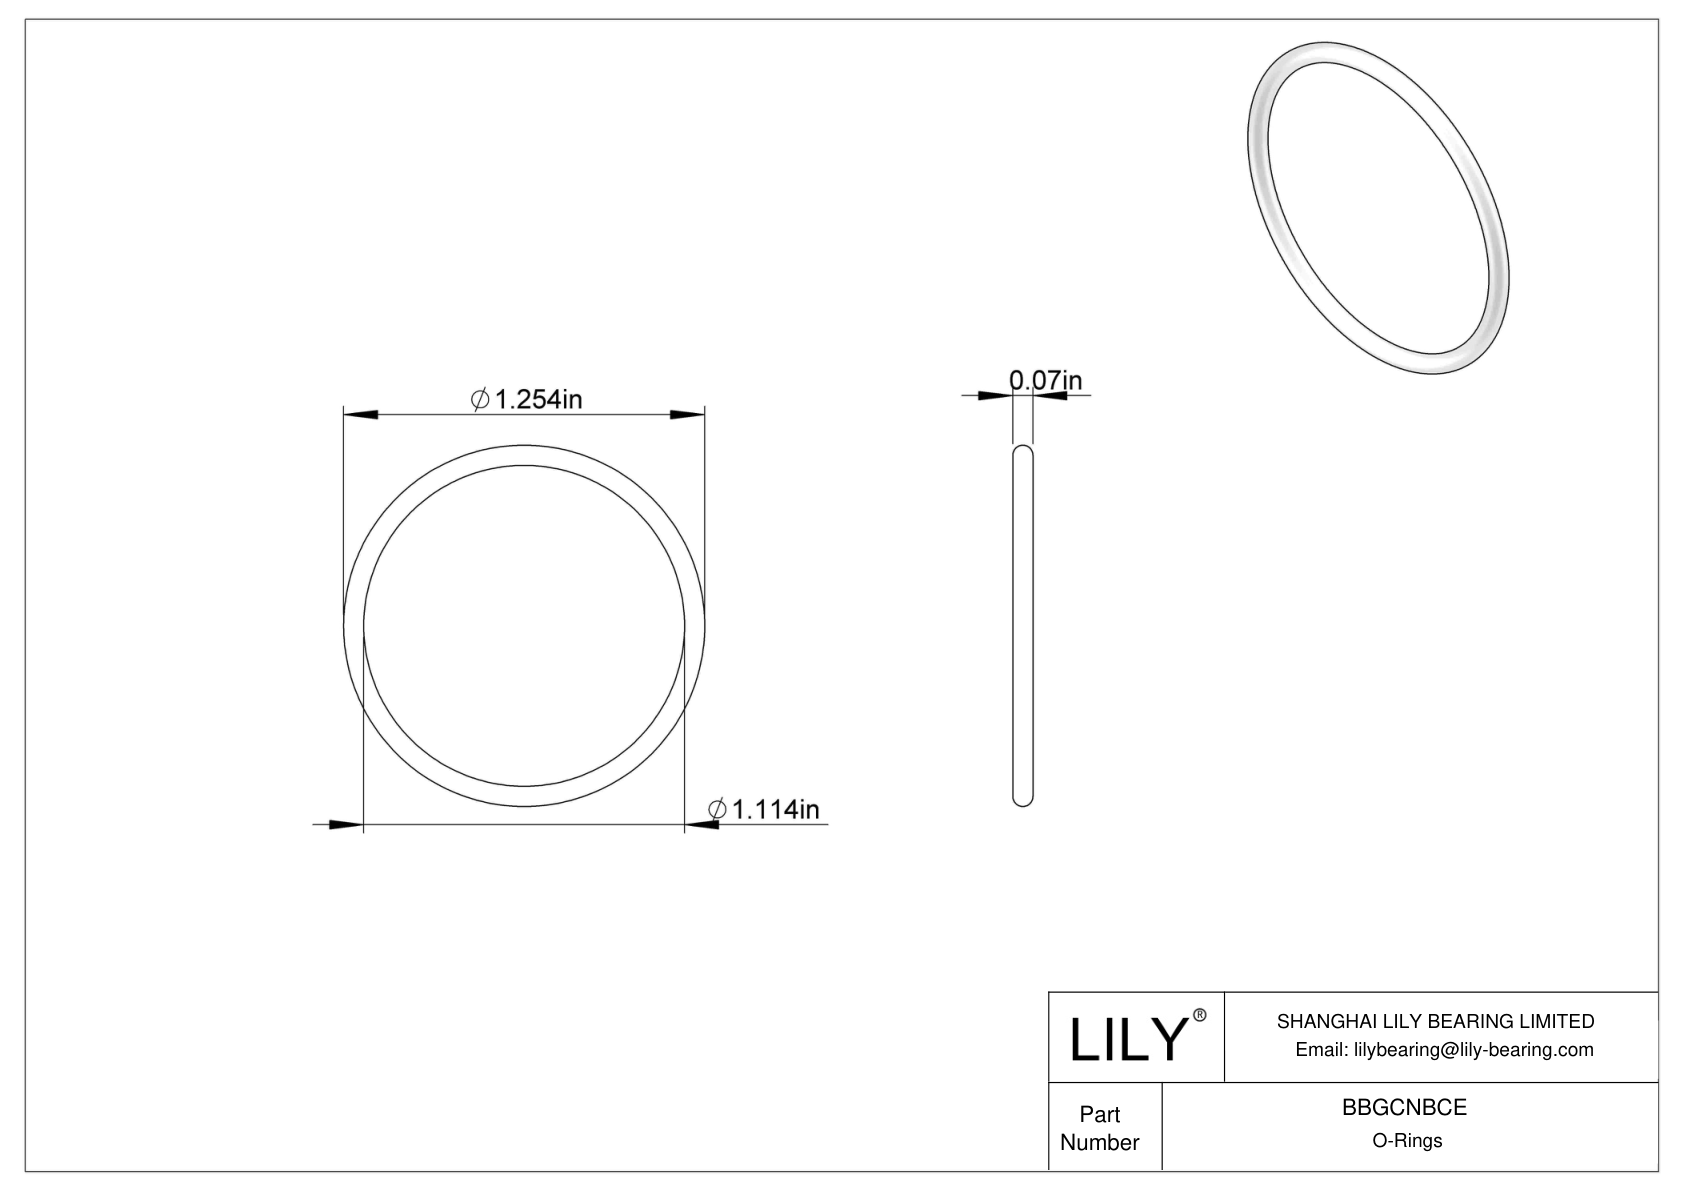 BBGCNBCE High Temperature O-Rings Round cad drawing